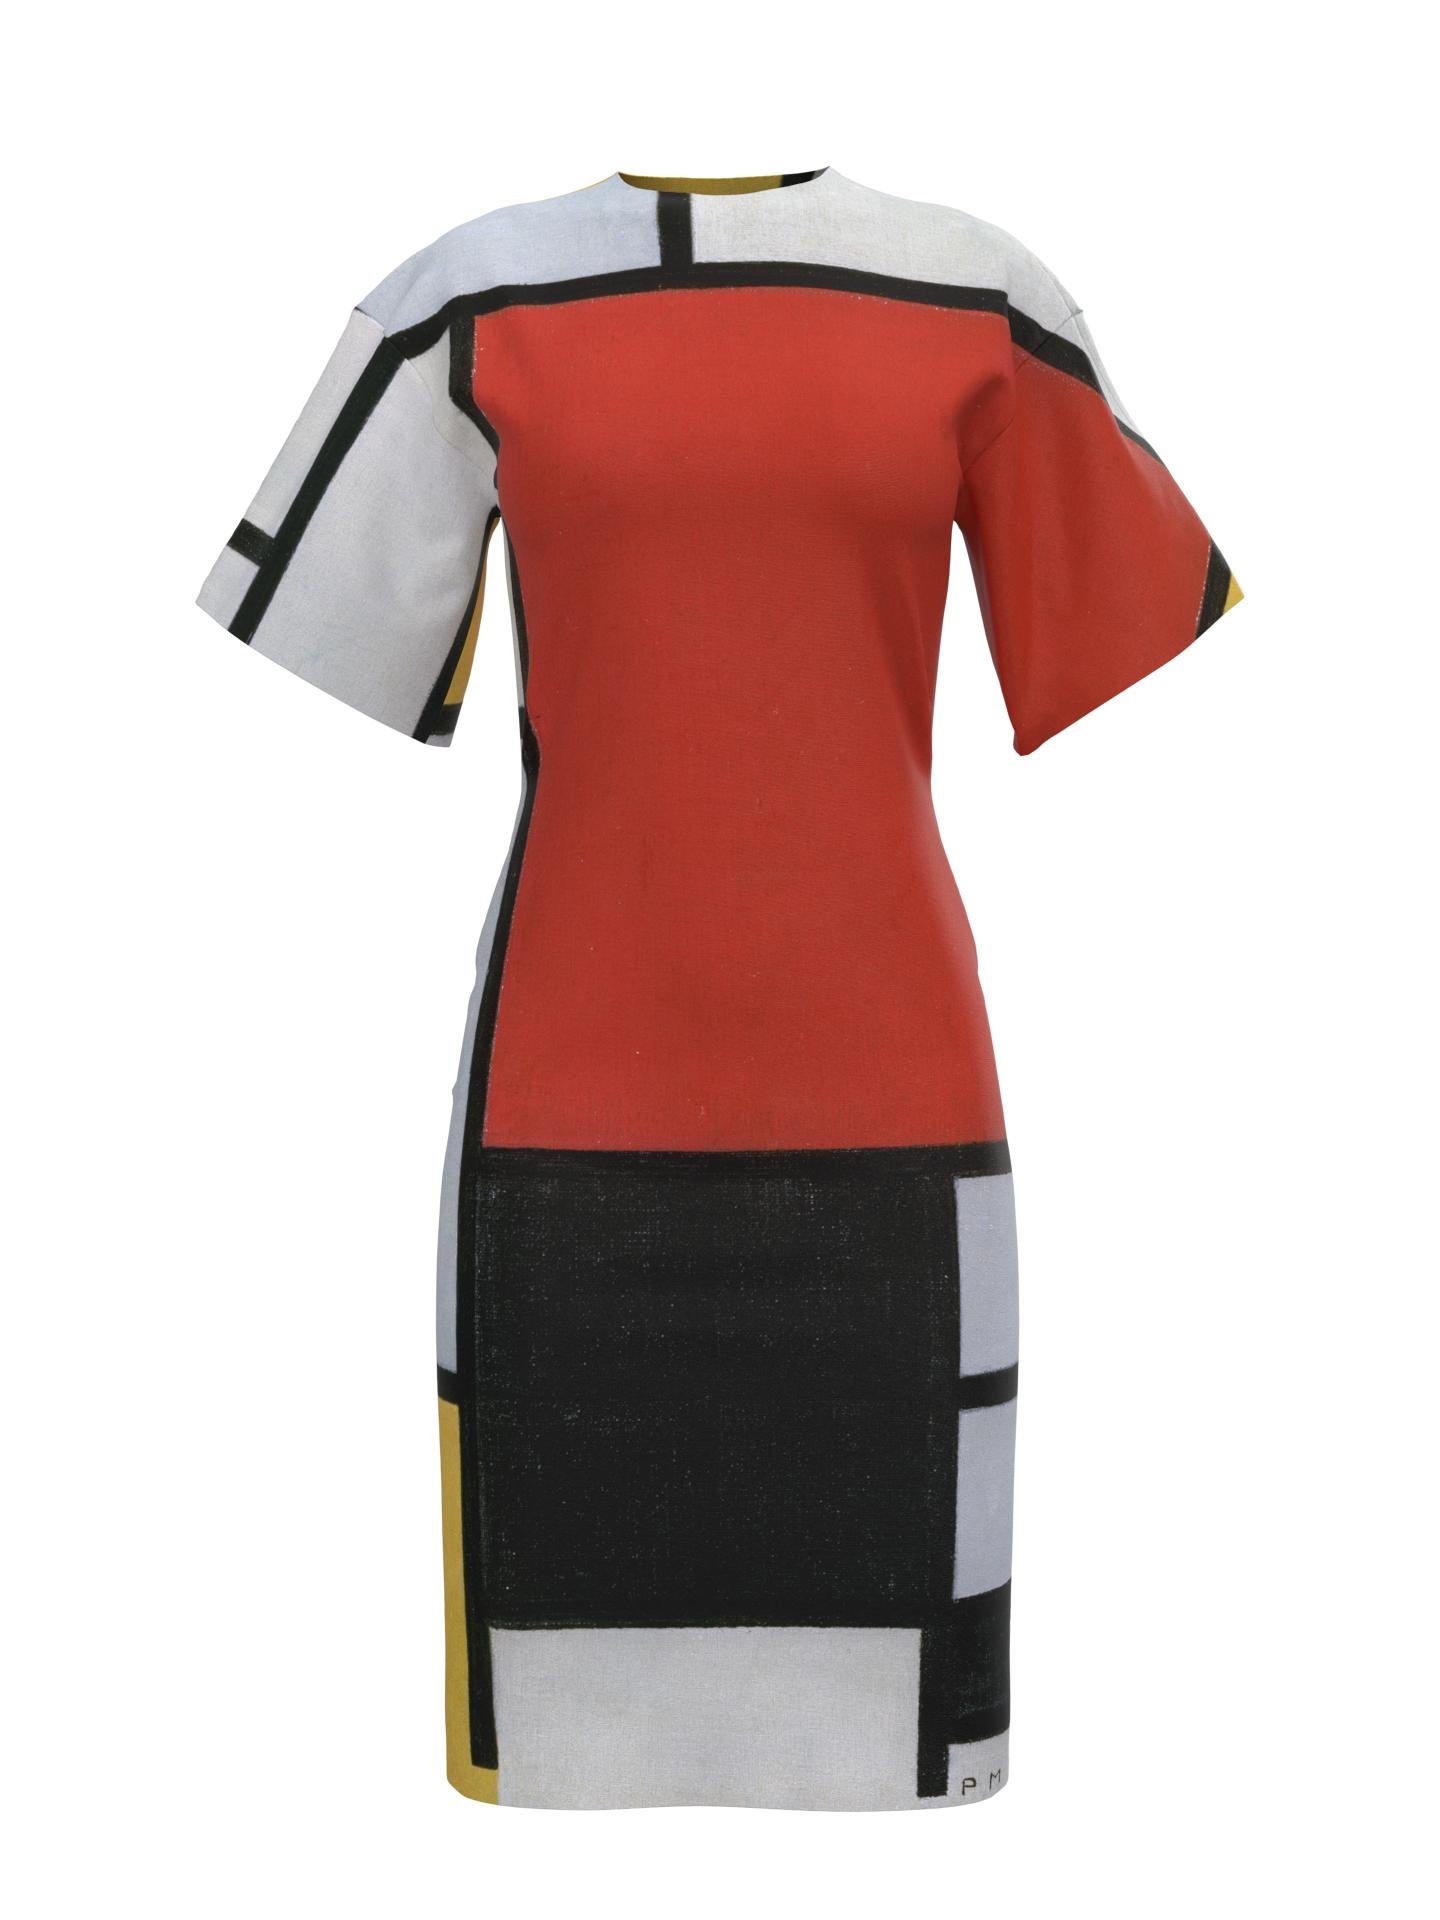 Dress-Composition with Red, Yellow, Blue and Black by DRESSX